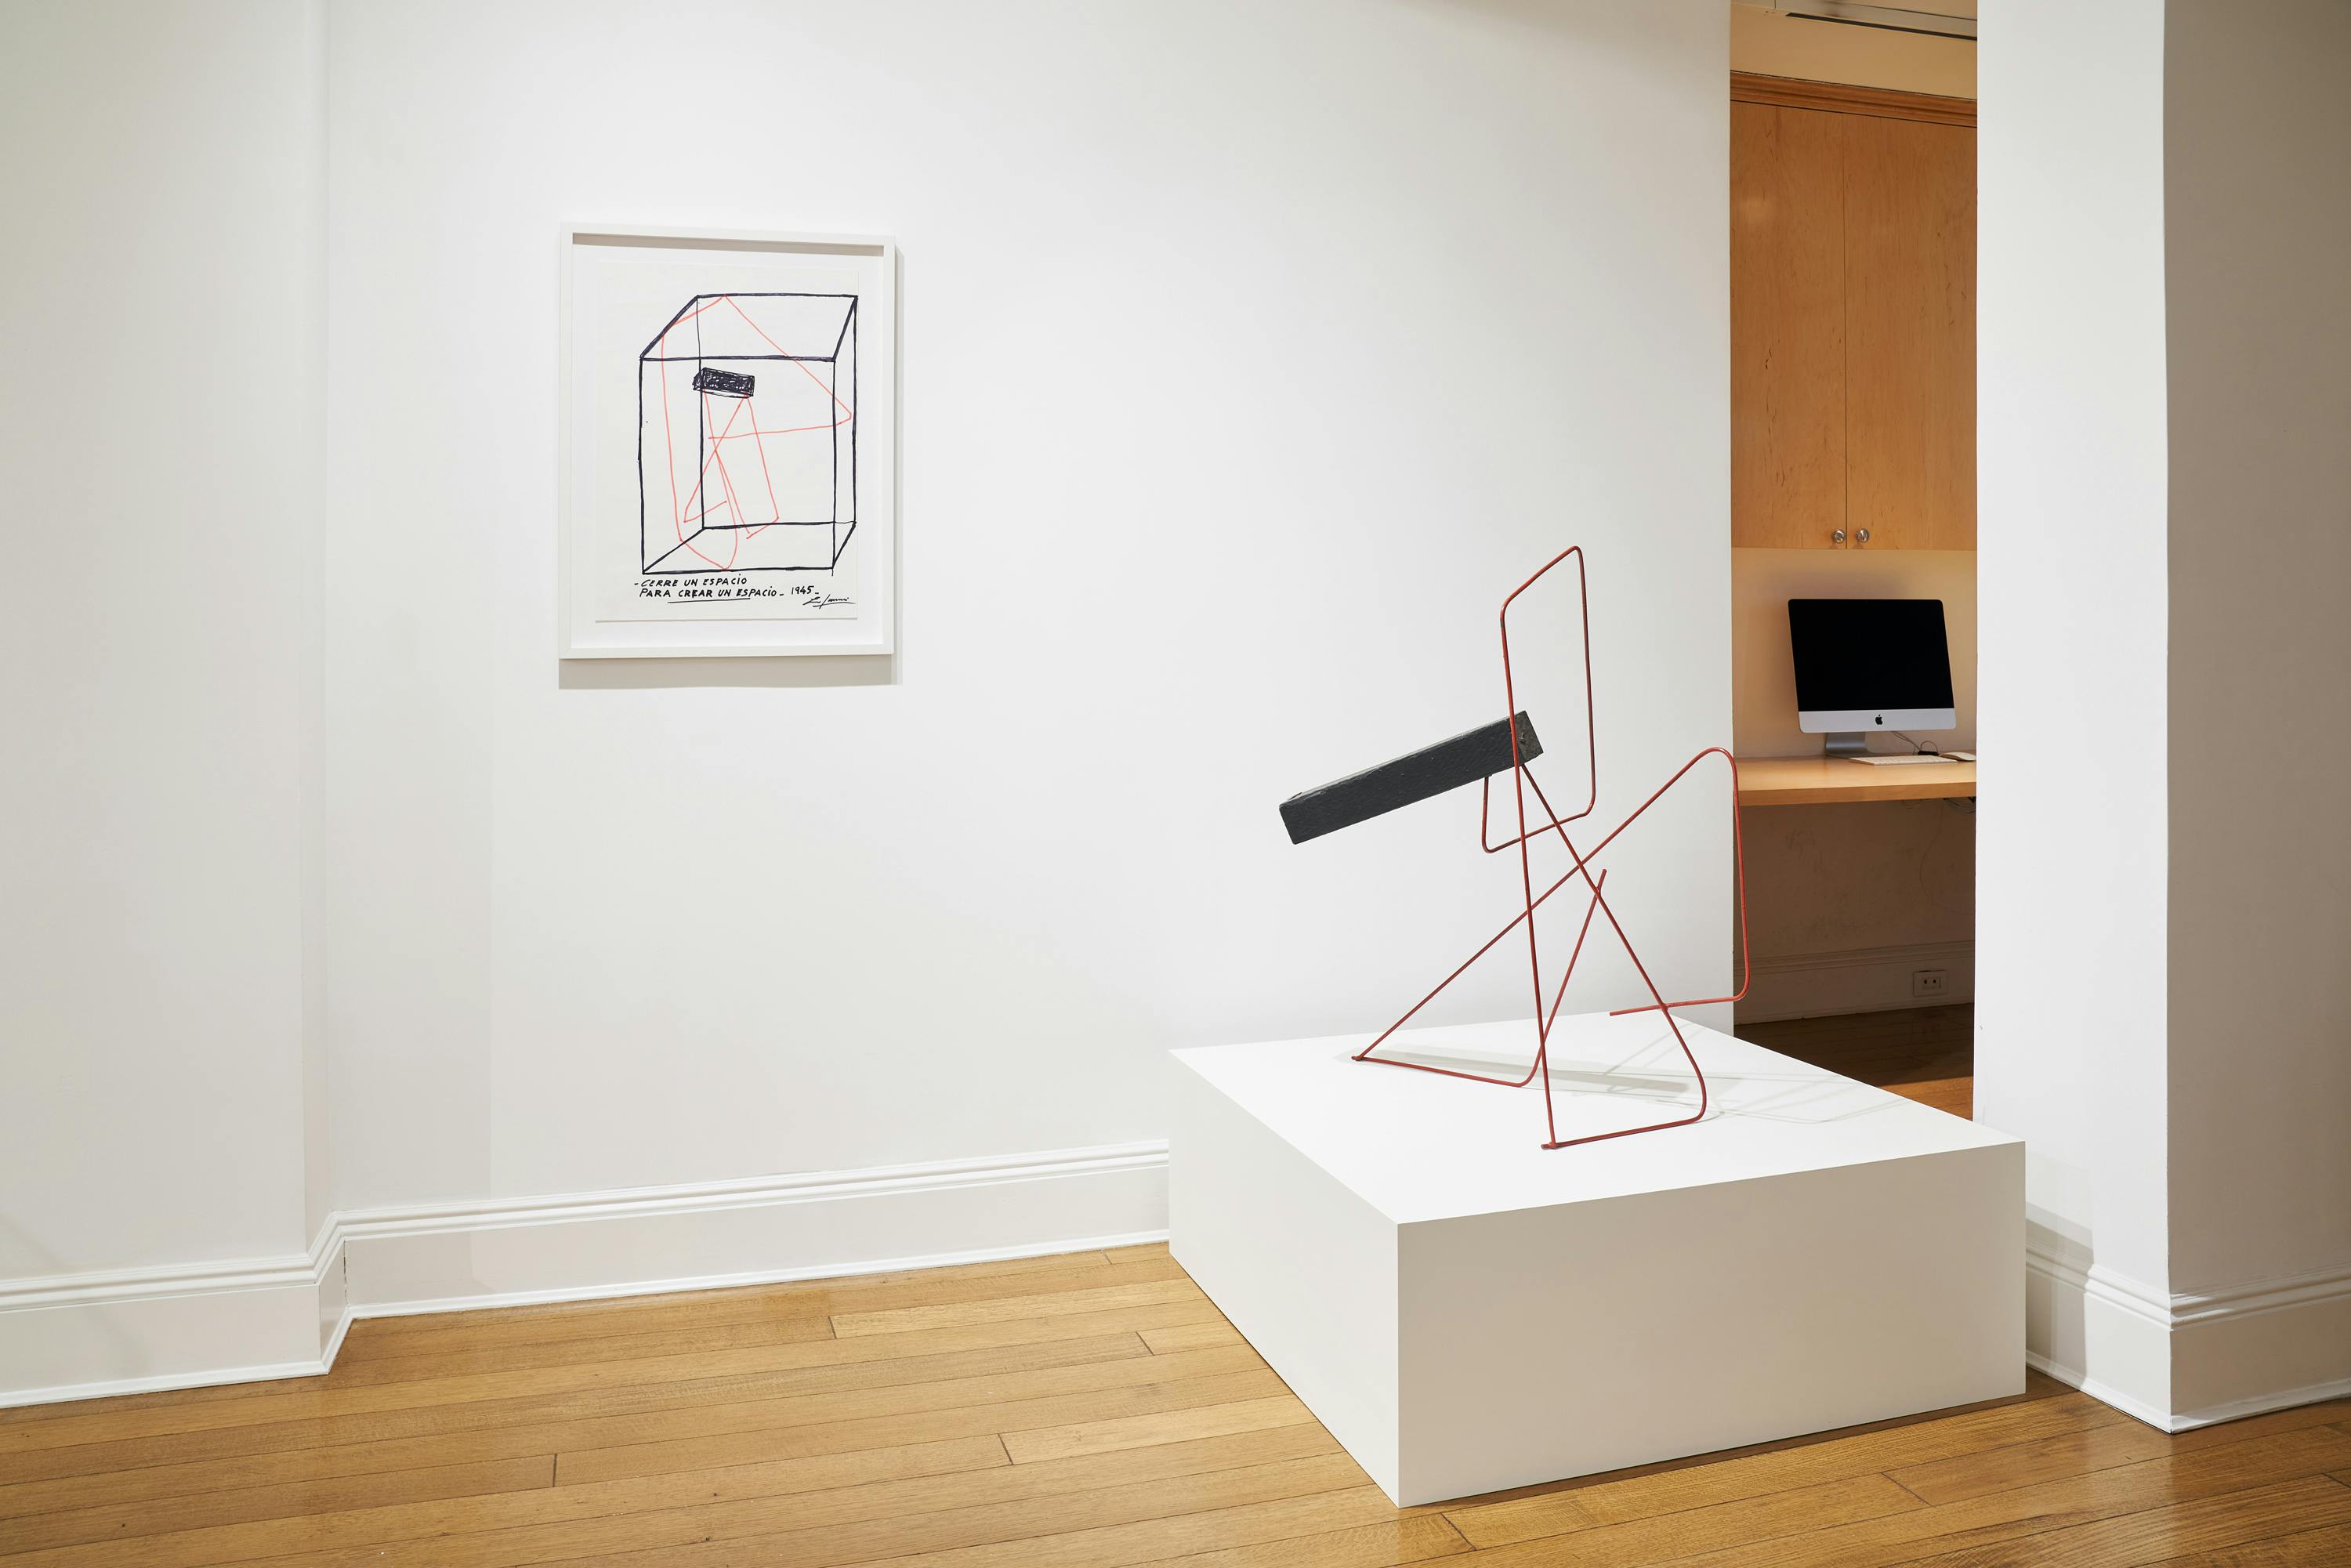 Gallery view image of an abstract sculpture accompanied by a wall-mounted drawing of the sculpture.